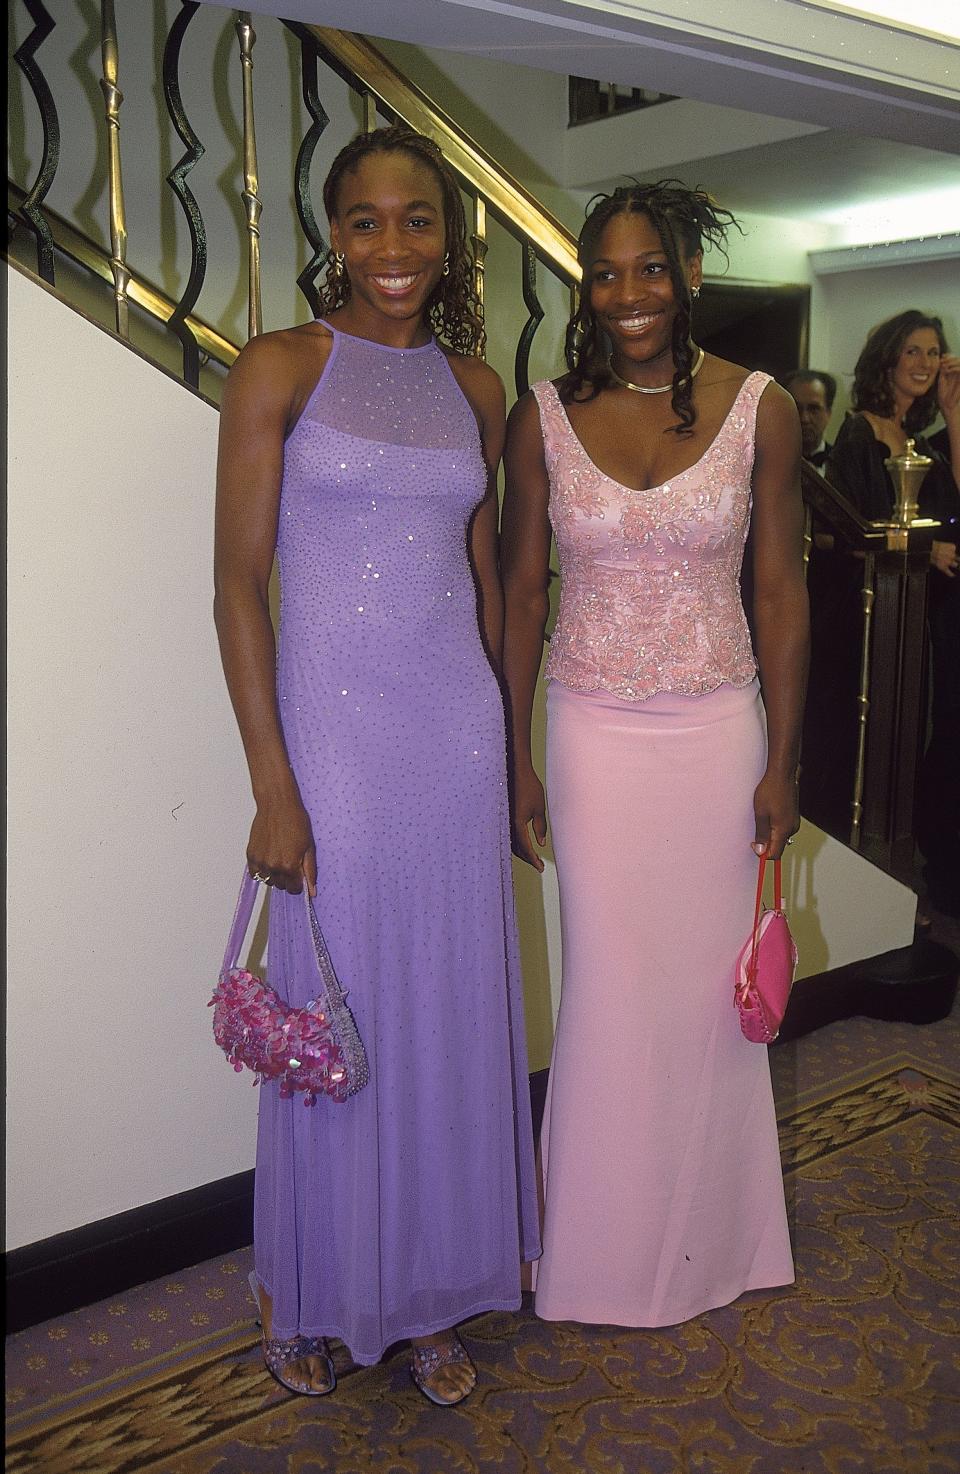 At the Champions Ball after the Wimbledon Lawn Tennis Championship&nbsp;on July 9, 2000.